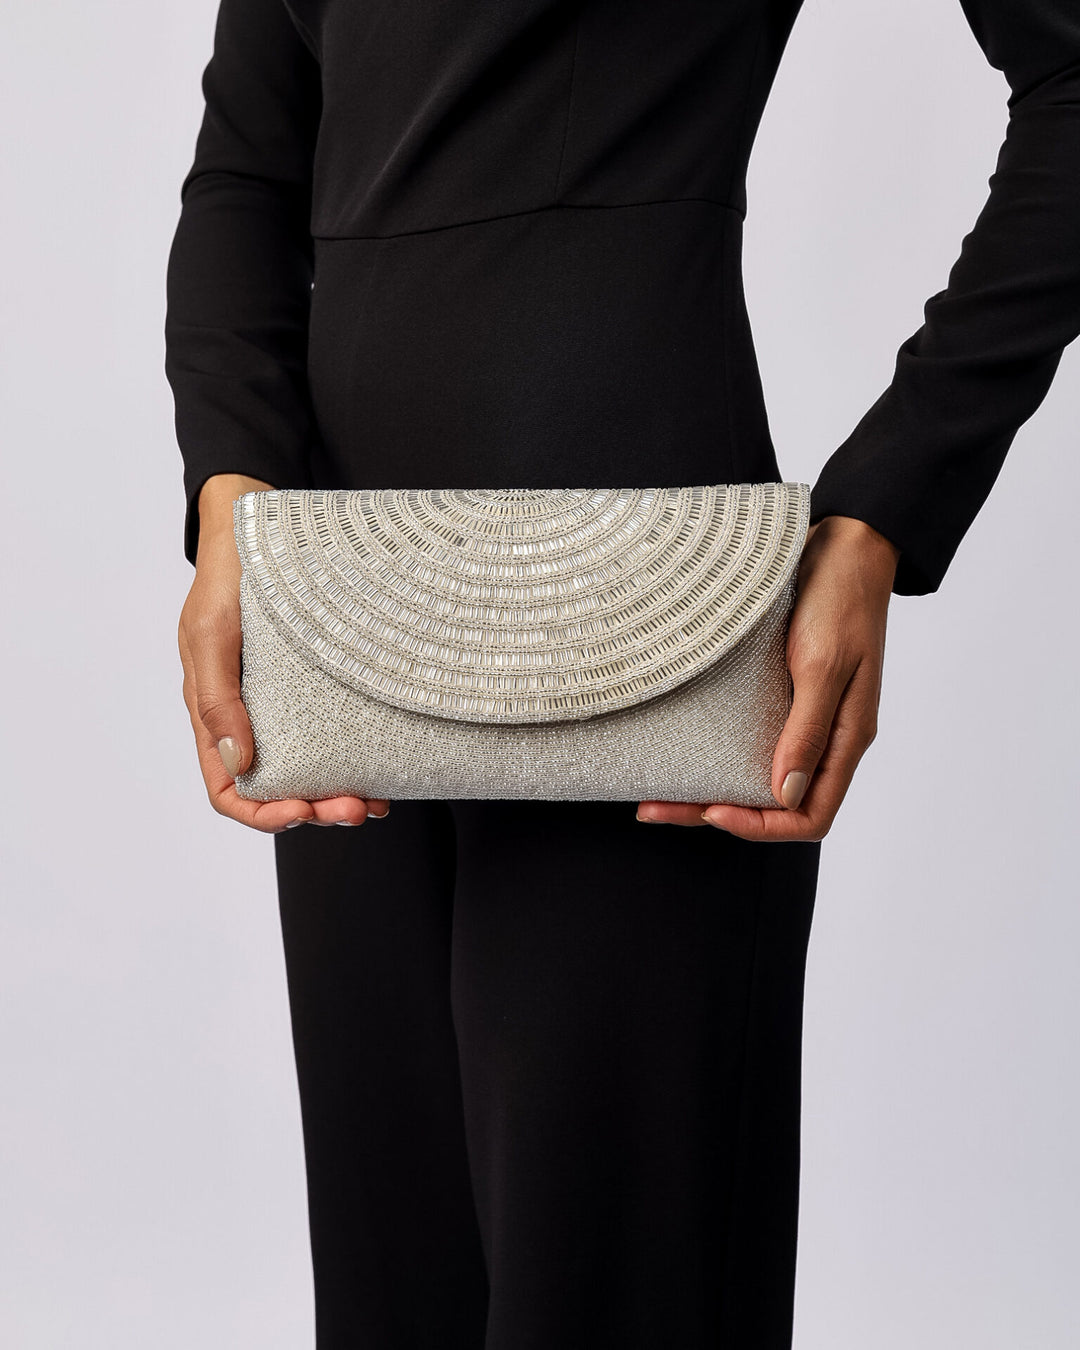 White Sequin Embellishmed Clutch